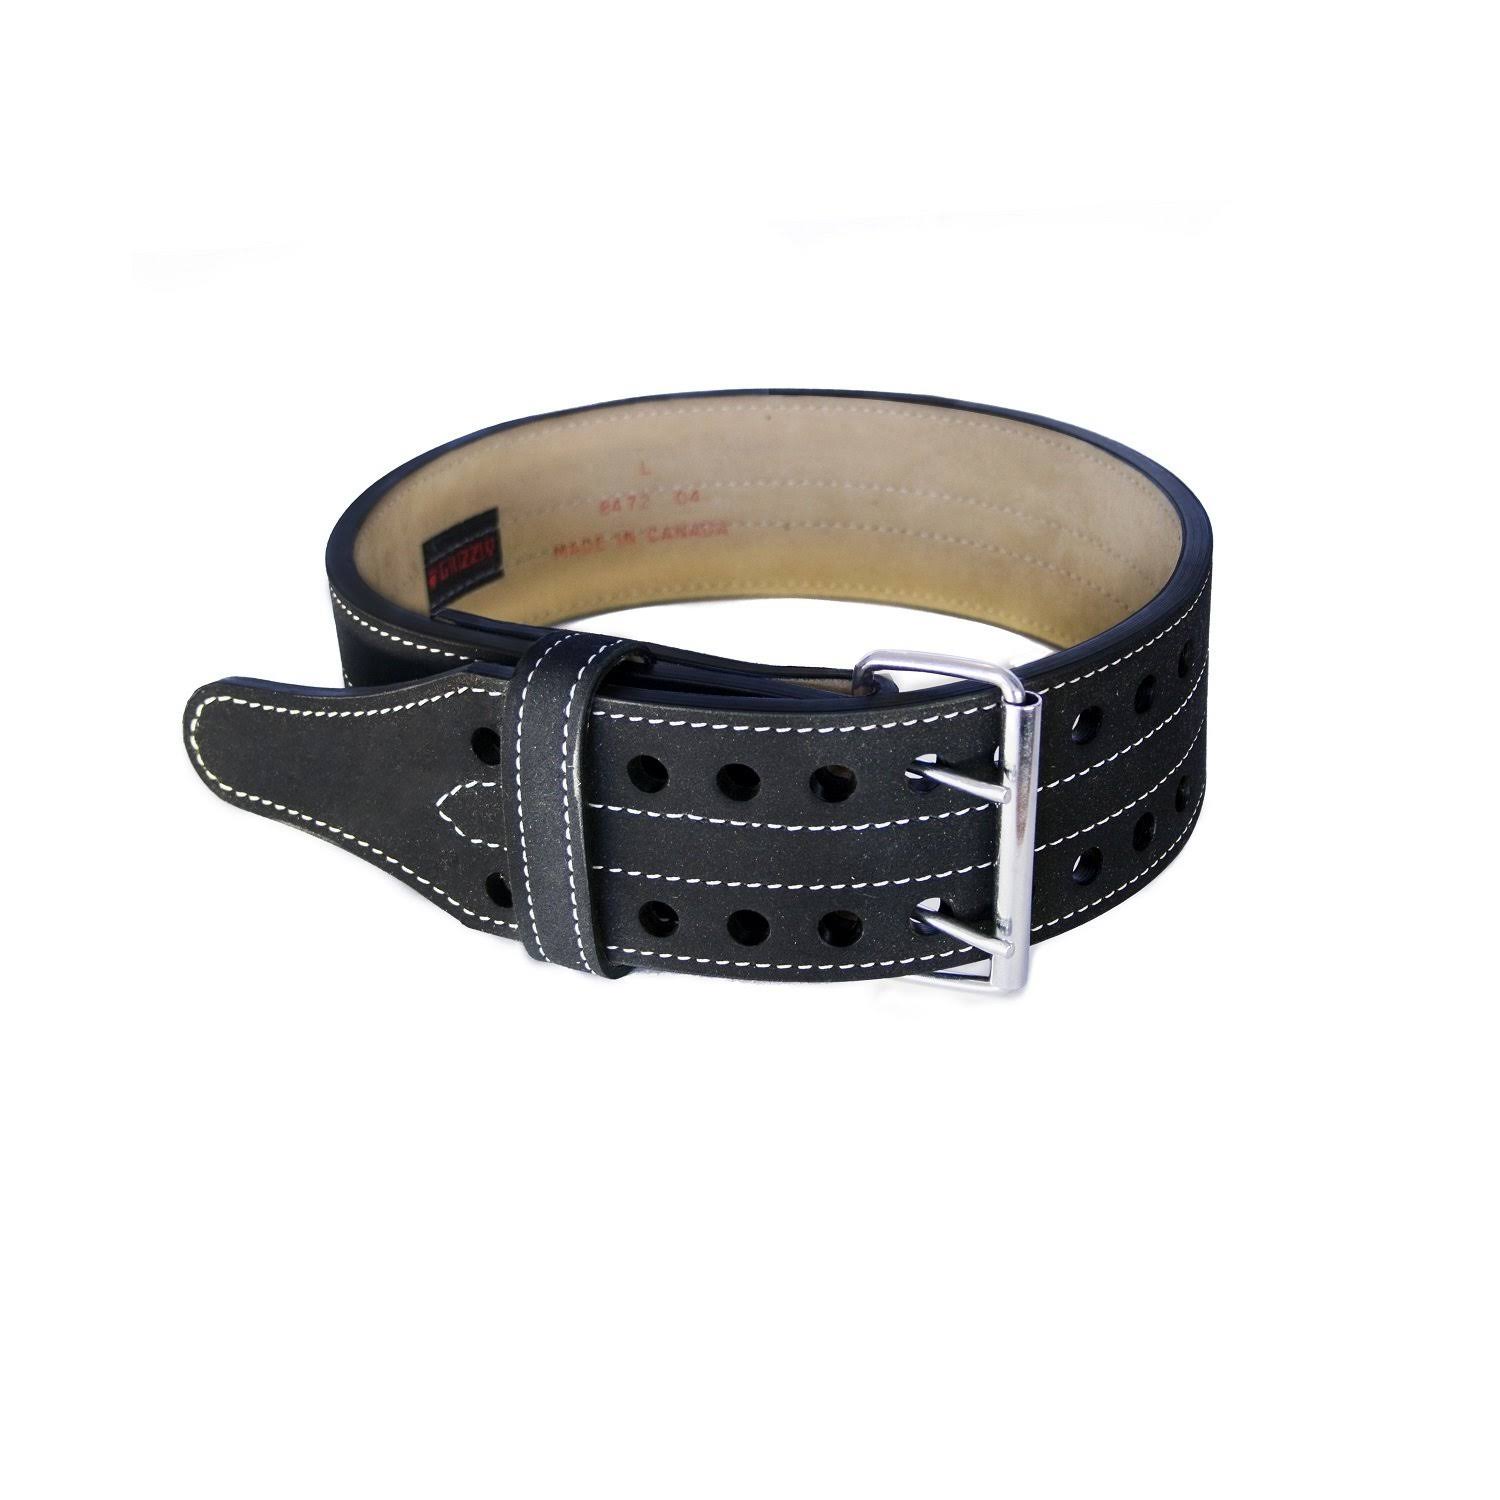 Grizzly Fitness Double Prong Power Lifting Belt - 4"